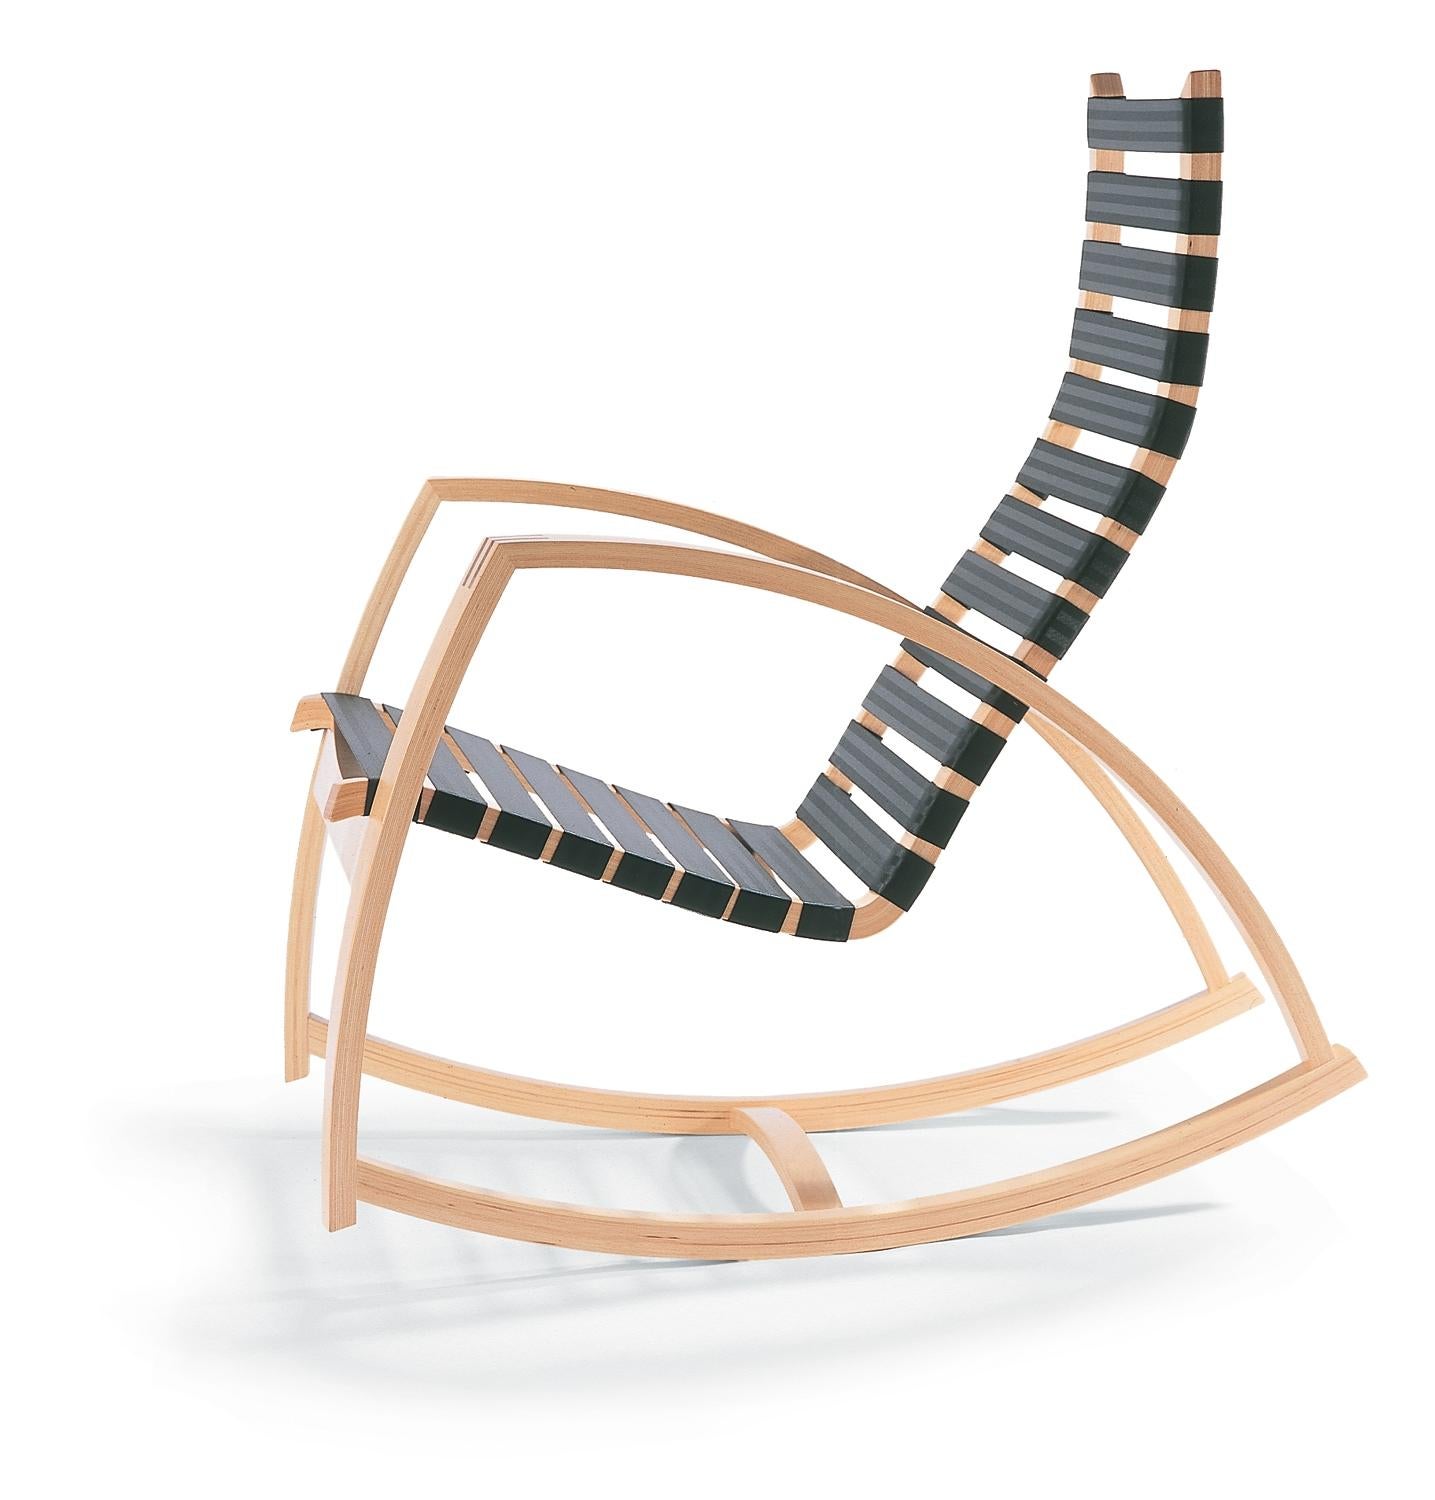 The Classic Atmos Rocker draws inspiration from the Shaker design tradition with the purity of modernism: clean, elegant lines, ears as a nod to nature. There is a balanced tension between the natural lyrical lines of the frame and the Industrial